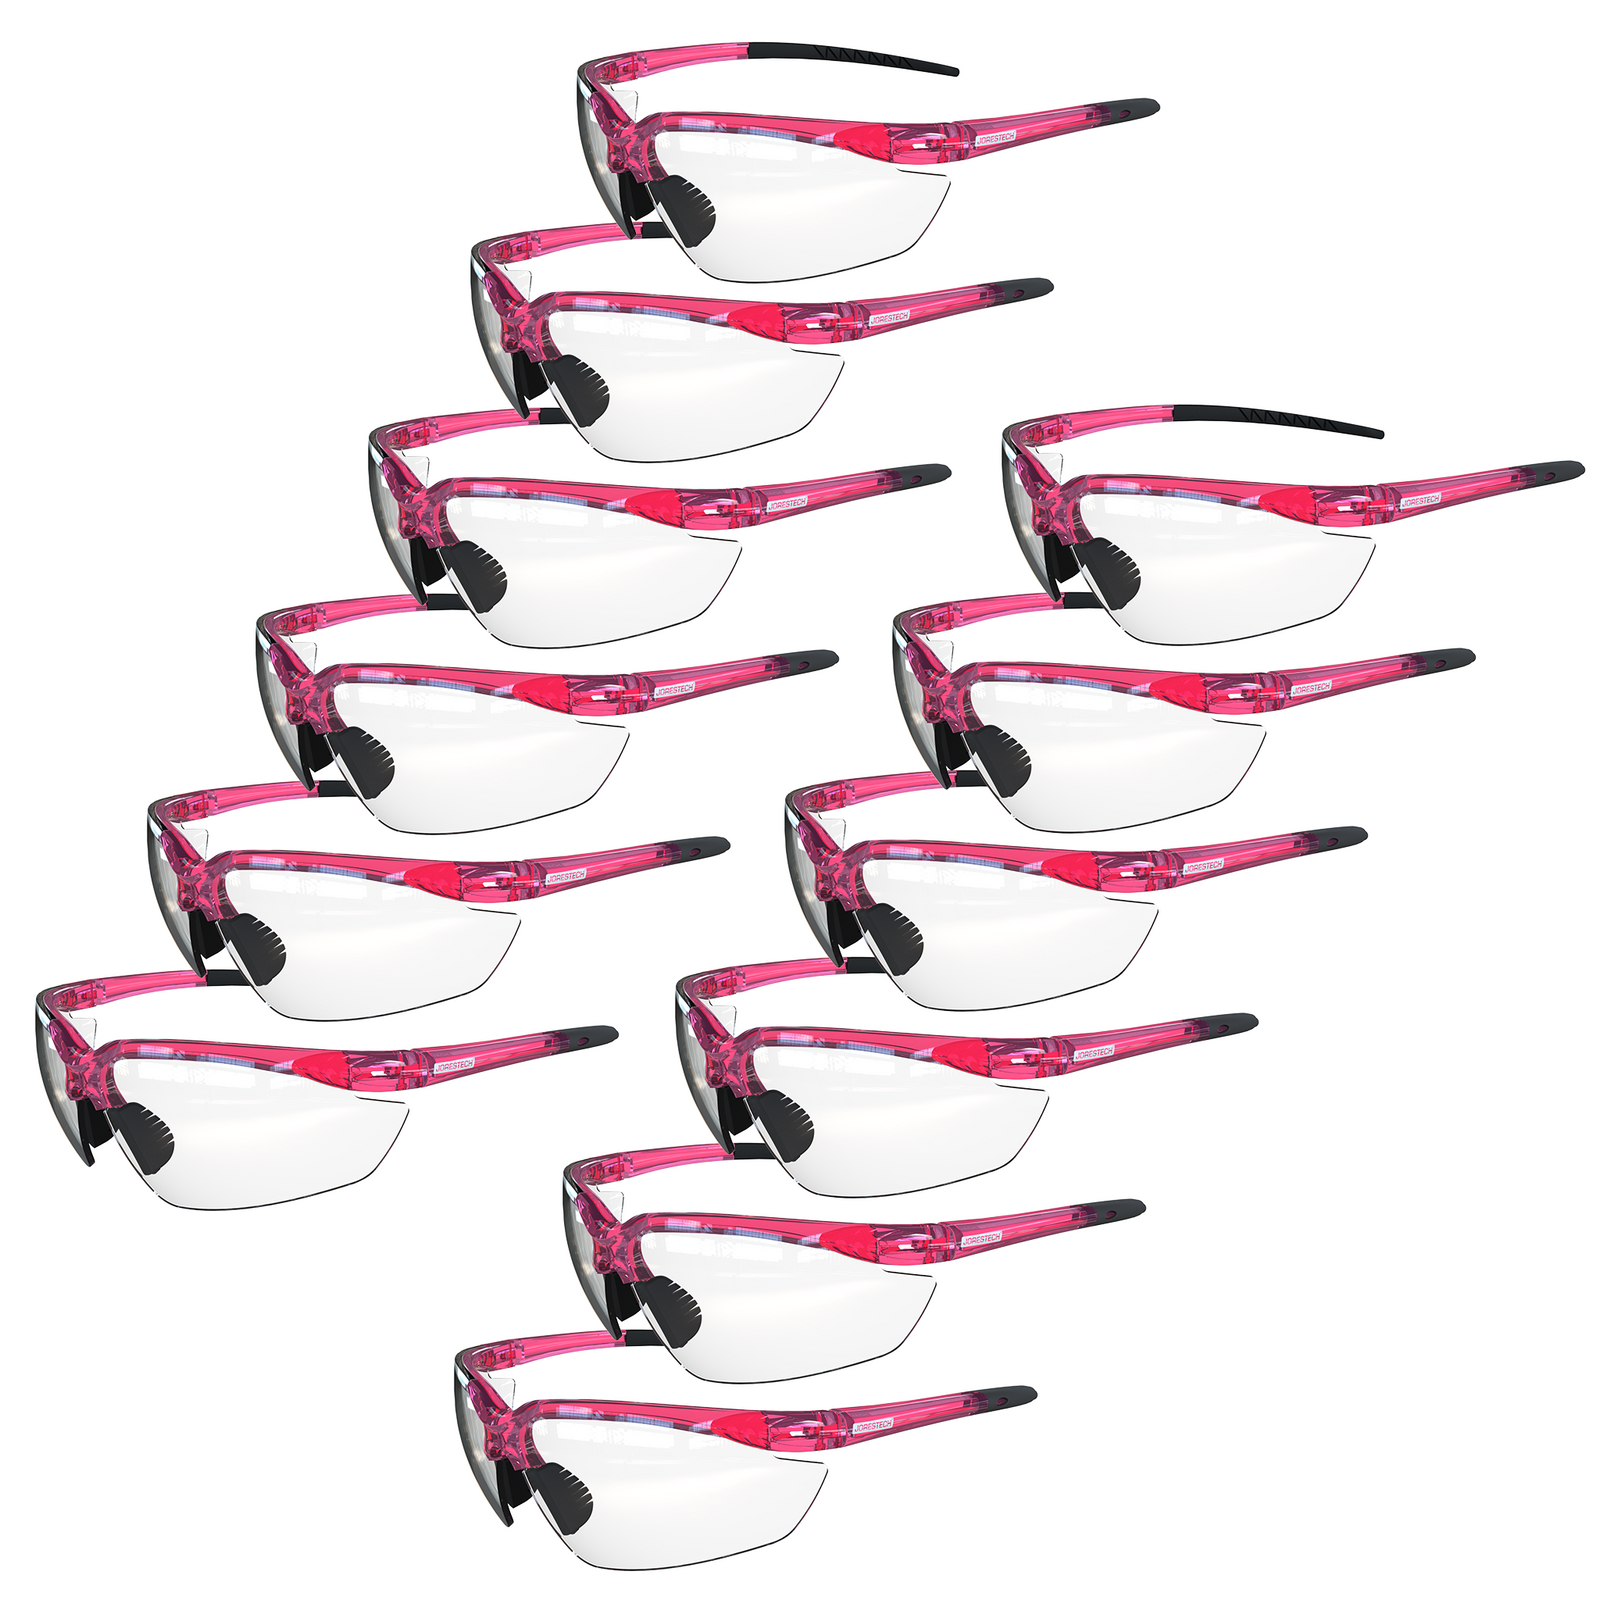 pack of 12 wraparound safety glasses with flexible rubber temple tips